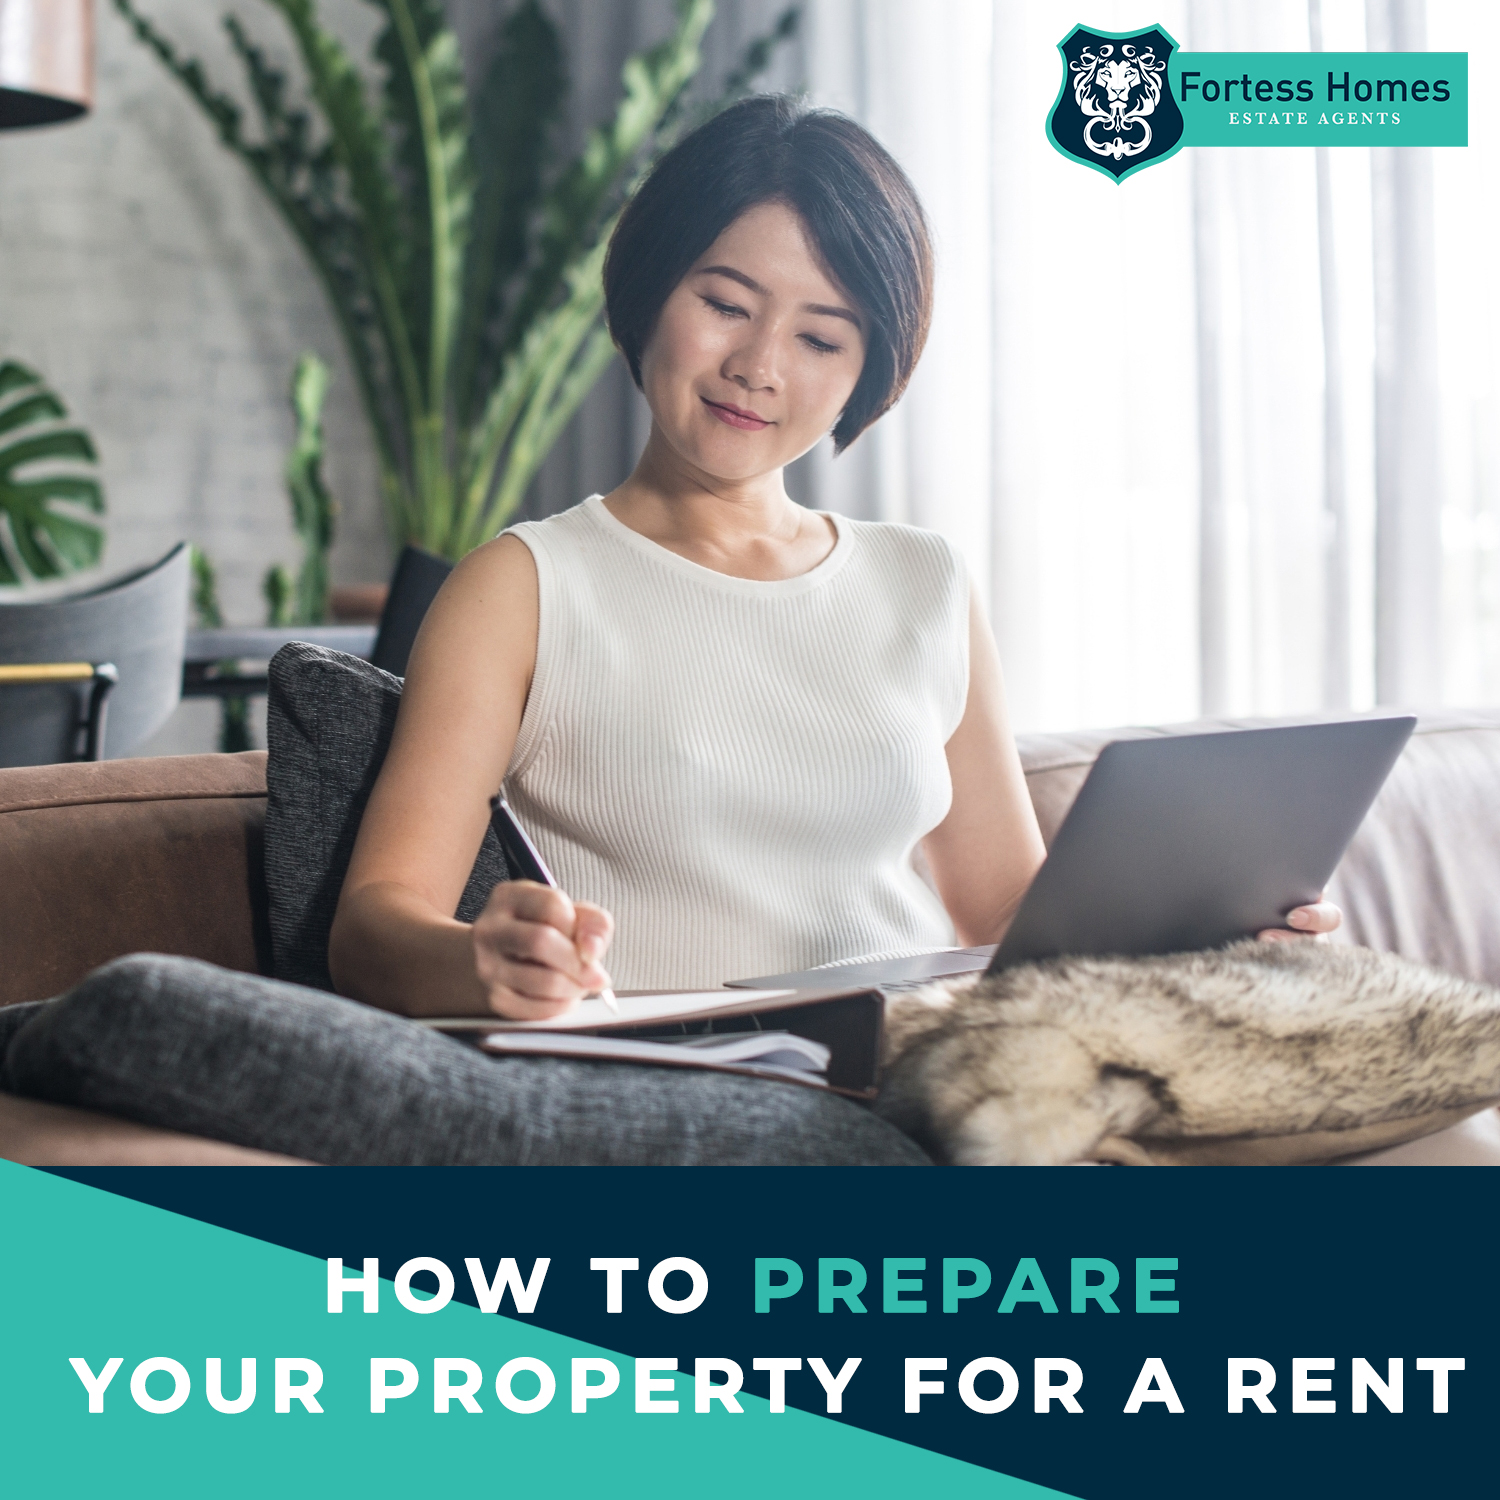 HOW TO PREPARE YOUR PROPERTY FOR A RENTAL